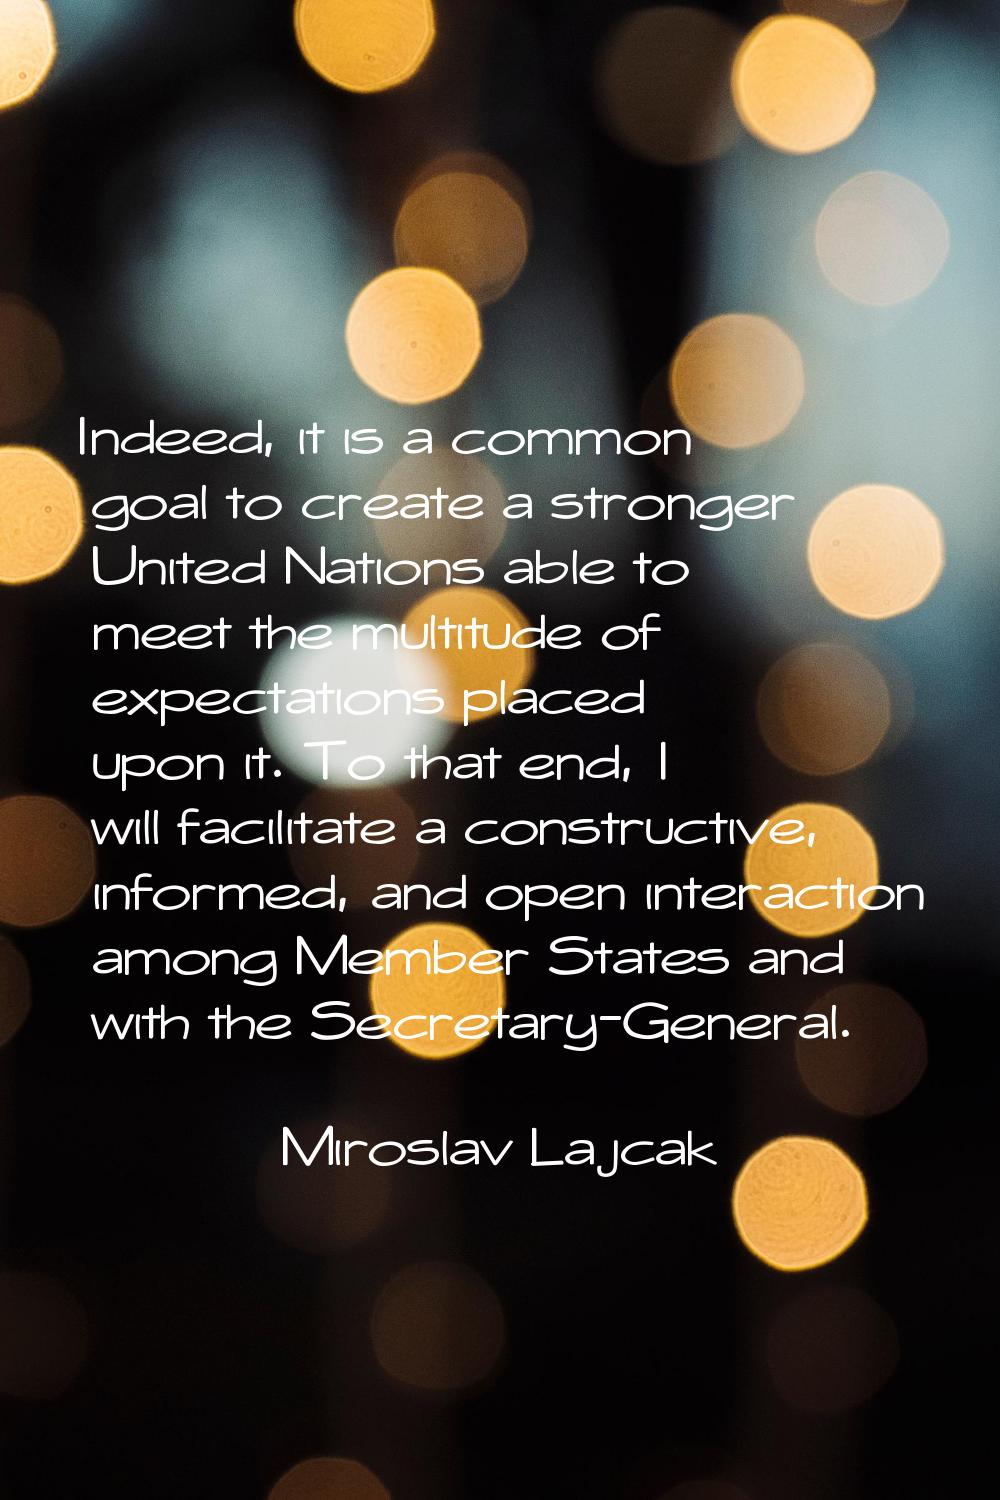 Indeed, it is a common goal to create a stronger United Nations able to meet the multitude of expec